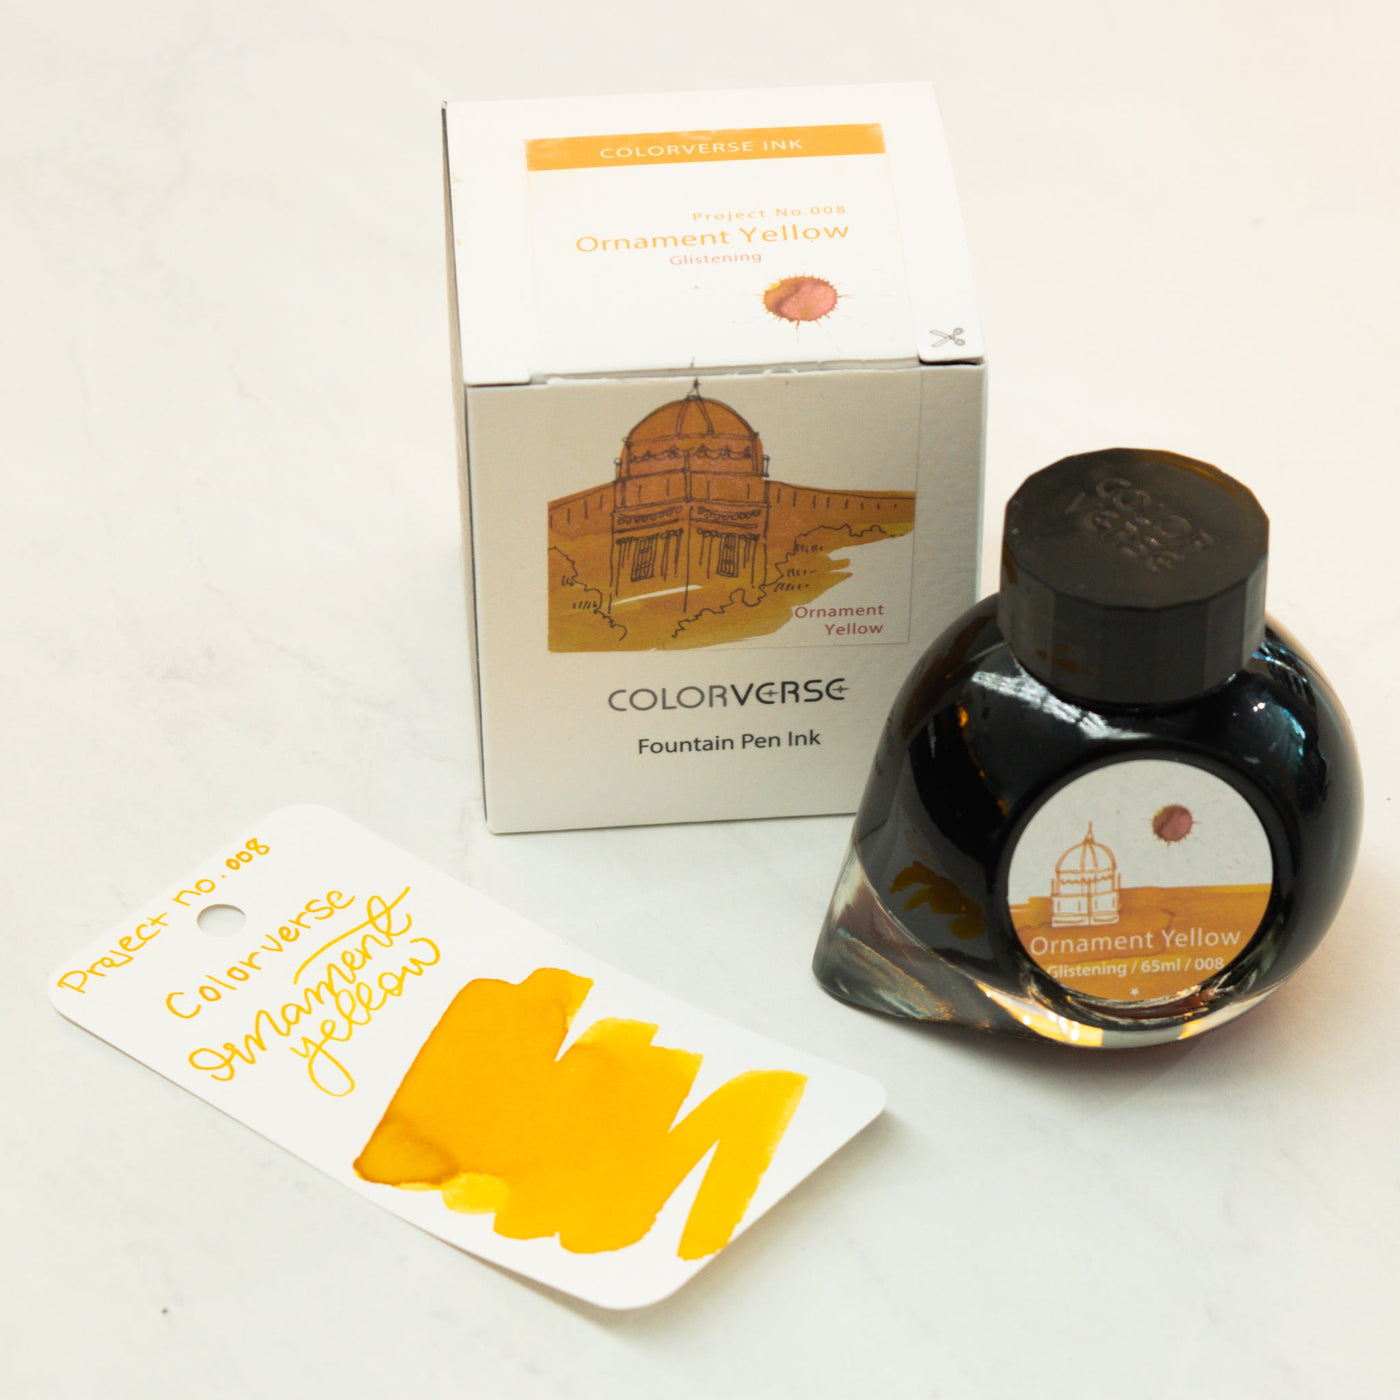 Colorverse Project No 008 Ornament Yellow Glistening Ink